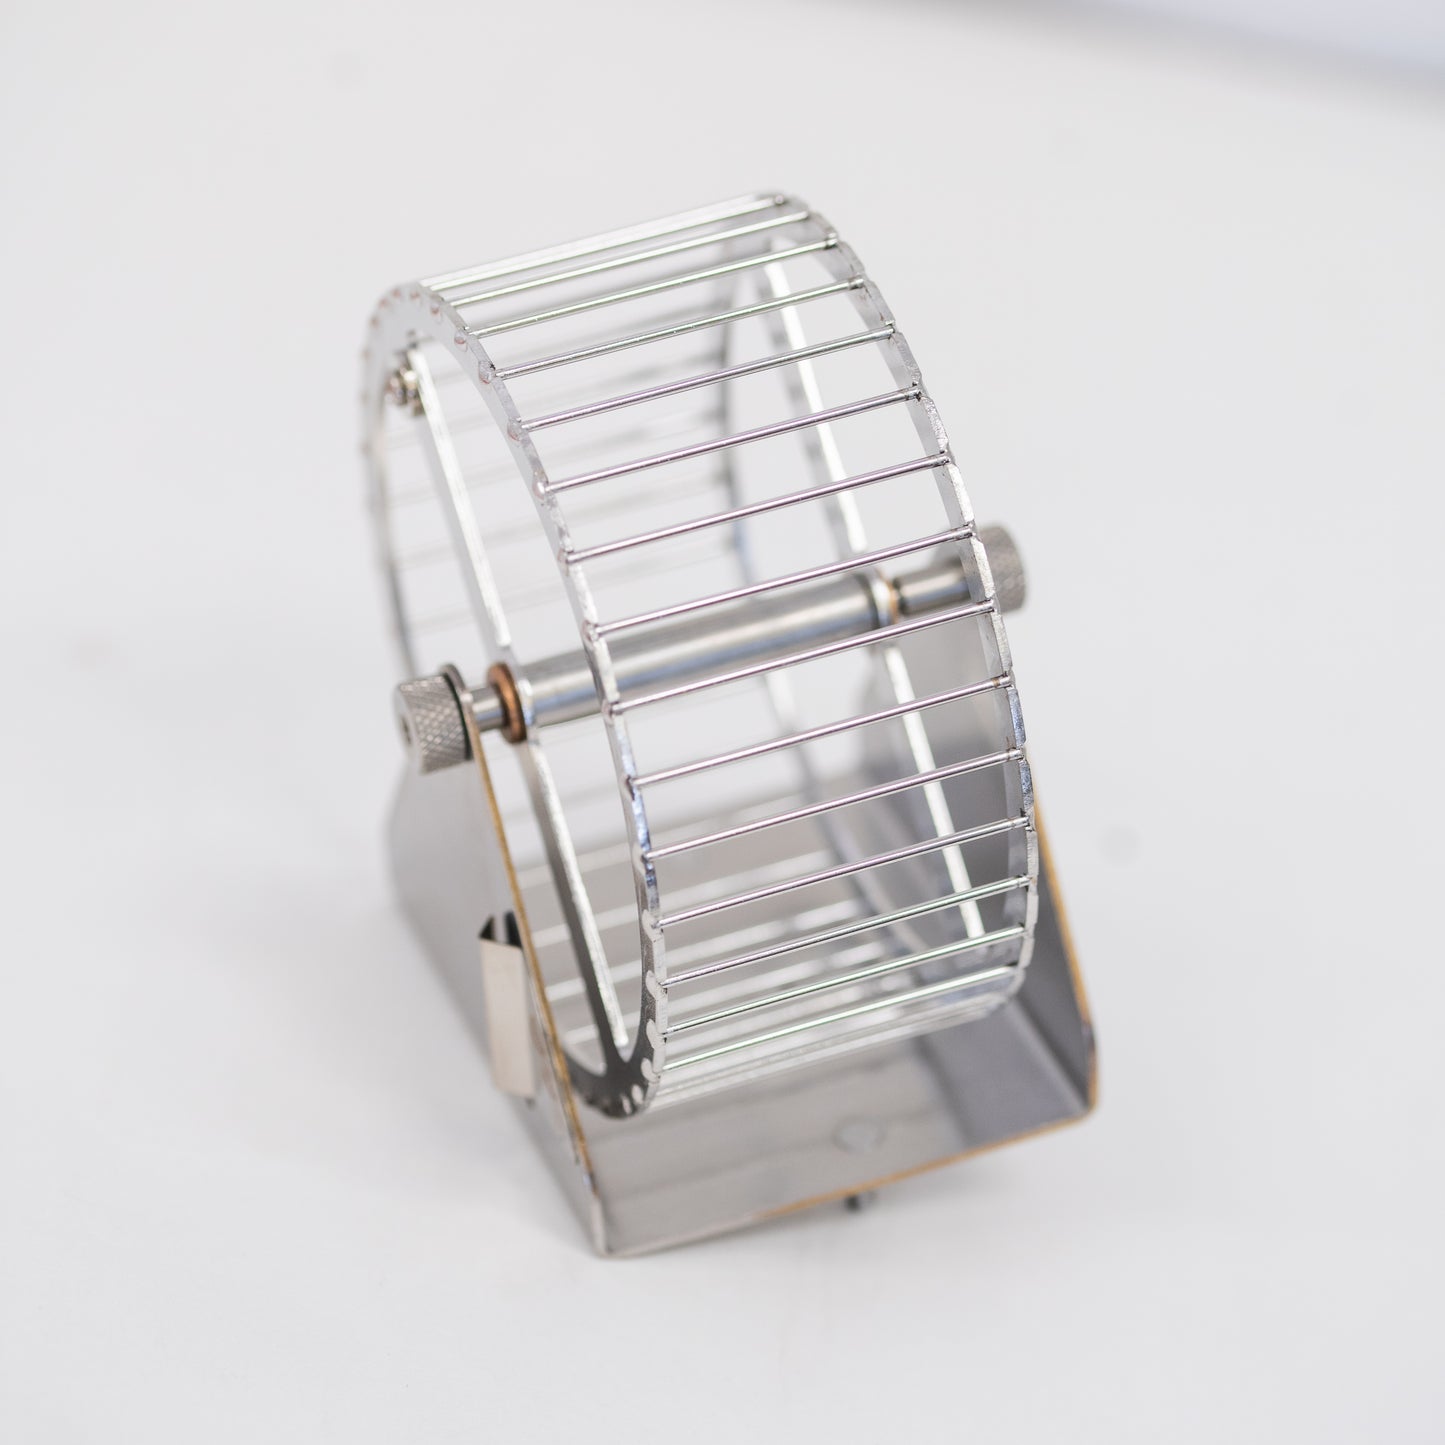 In-Cage Running Wheels with Reed Switch Include Mouse